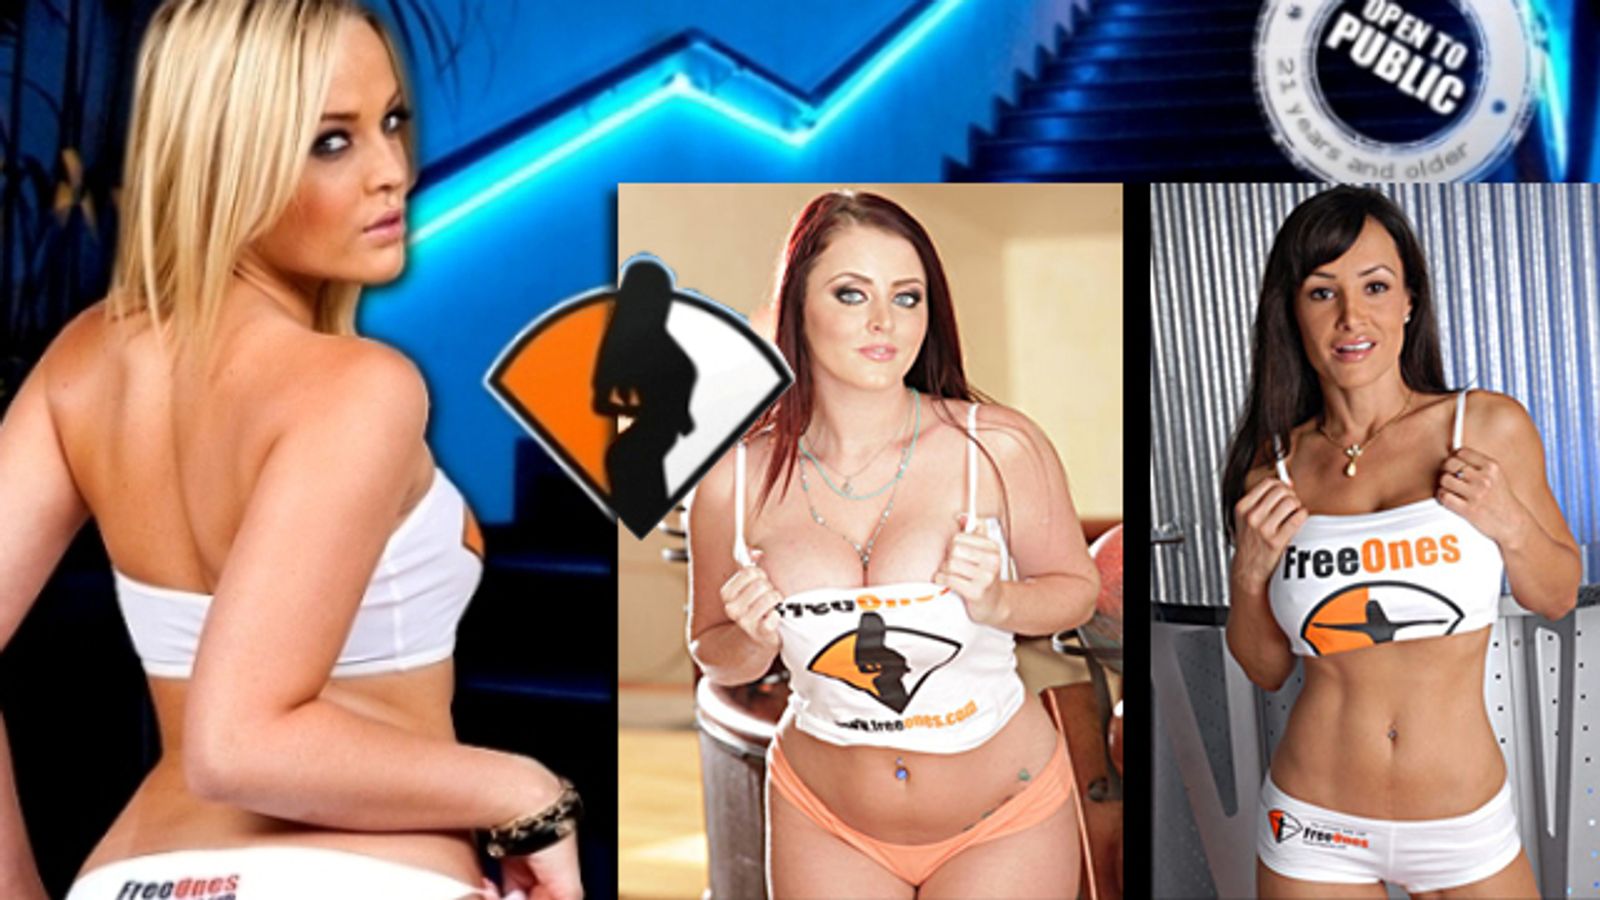 Miss FreeOnes Party Set for Saturday; The Spyderz to Perform